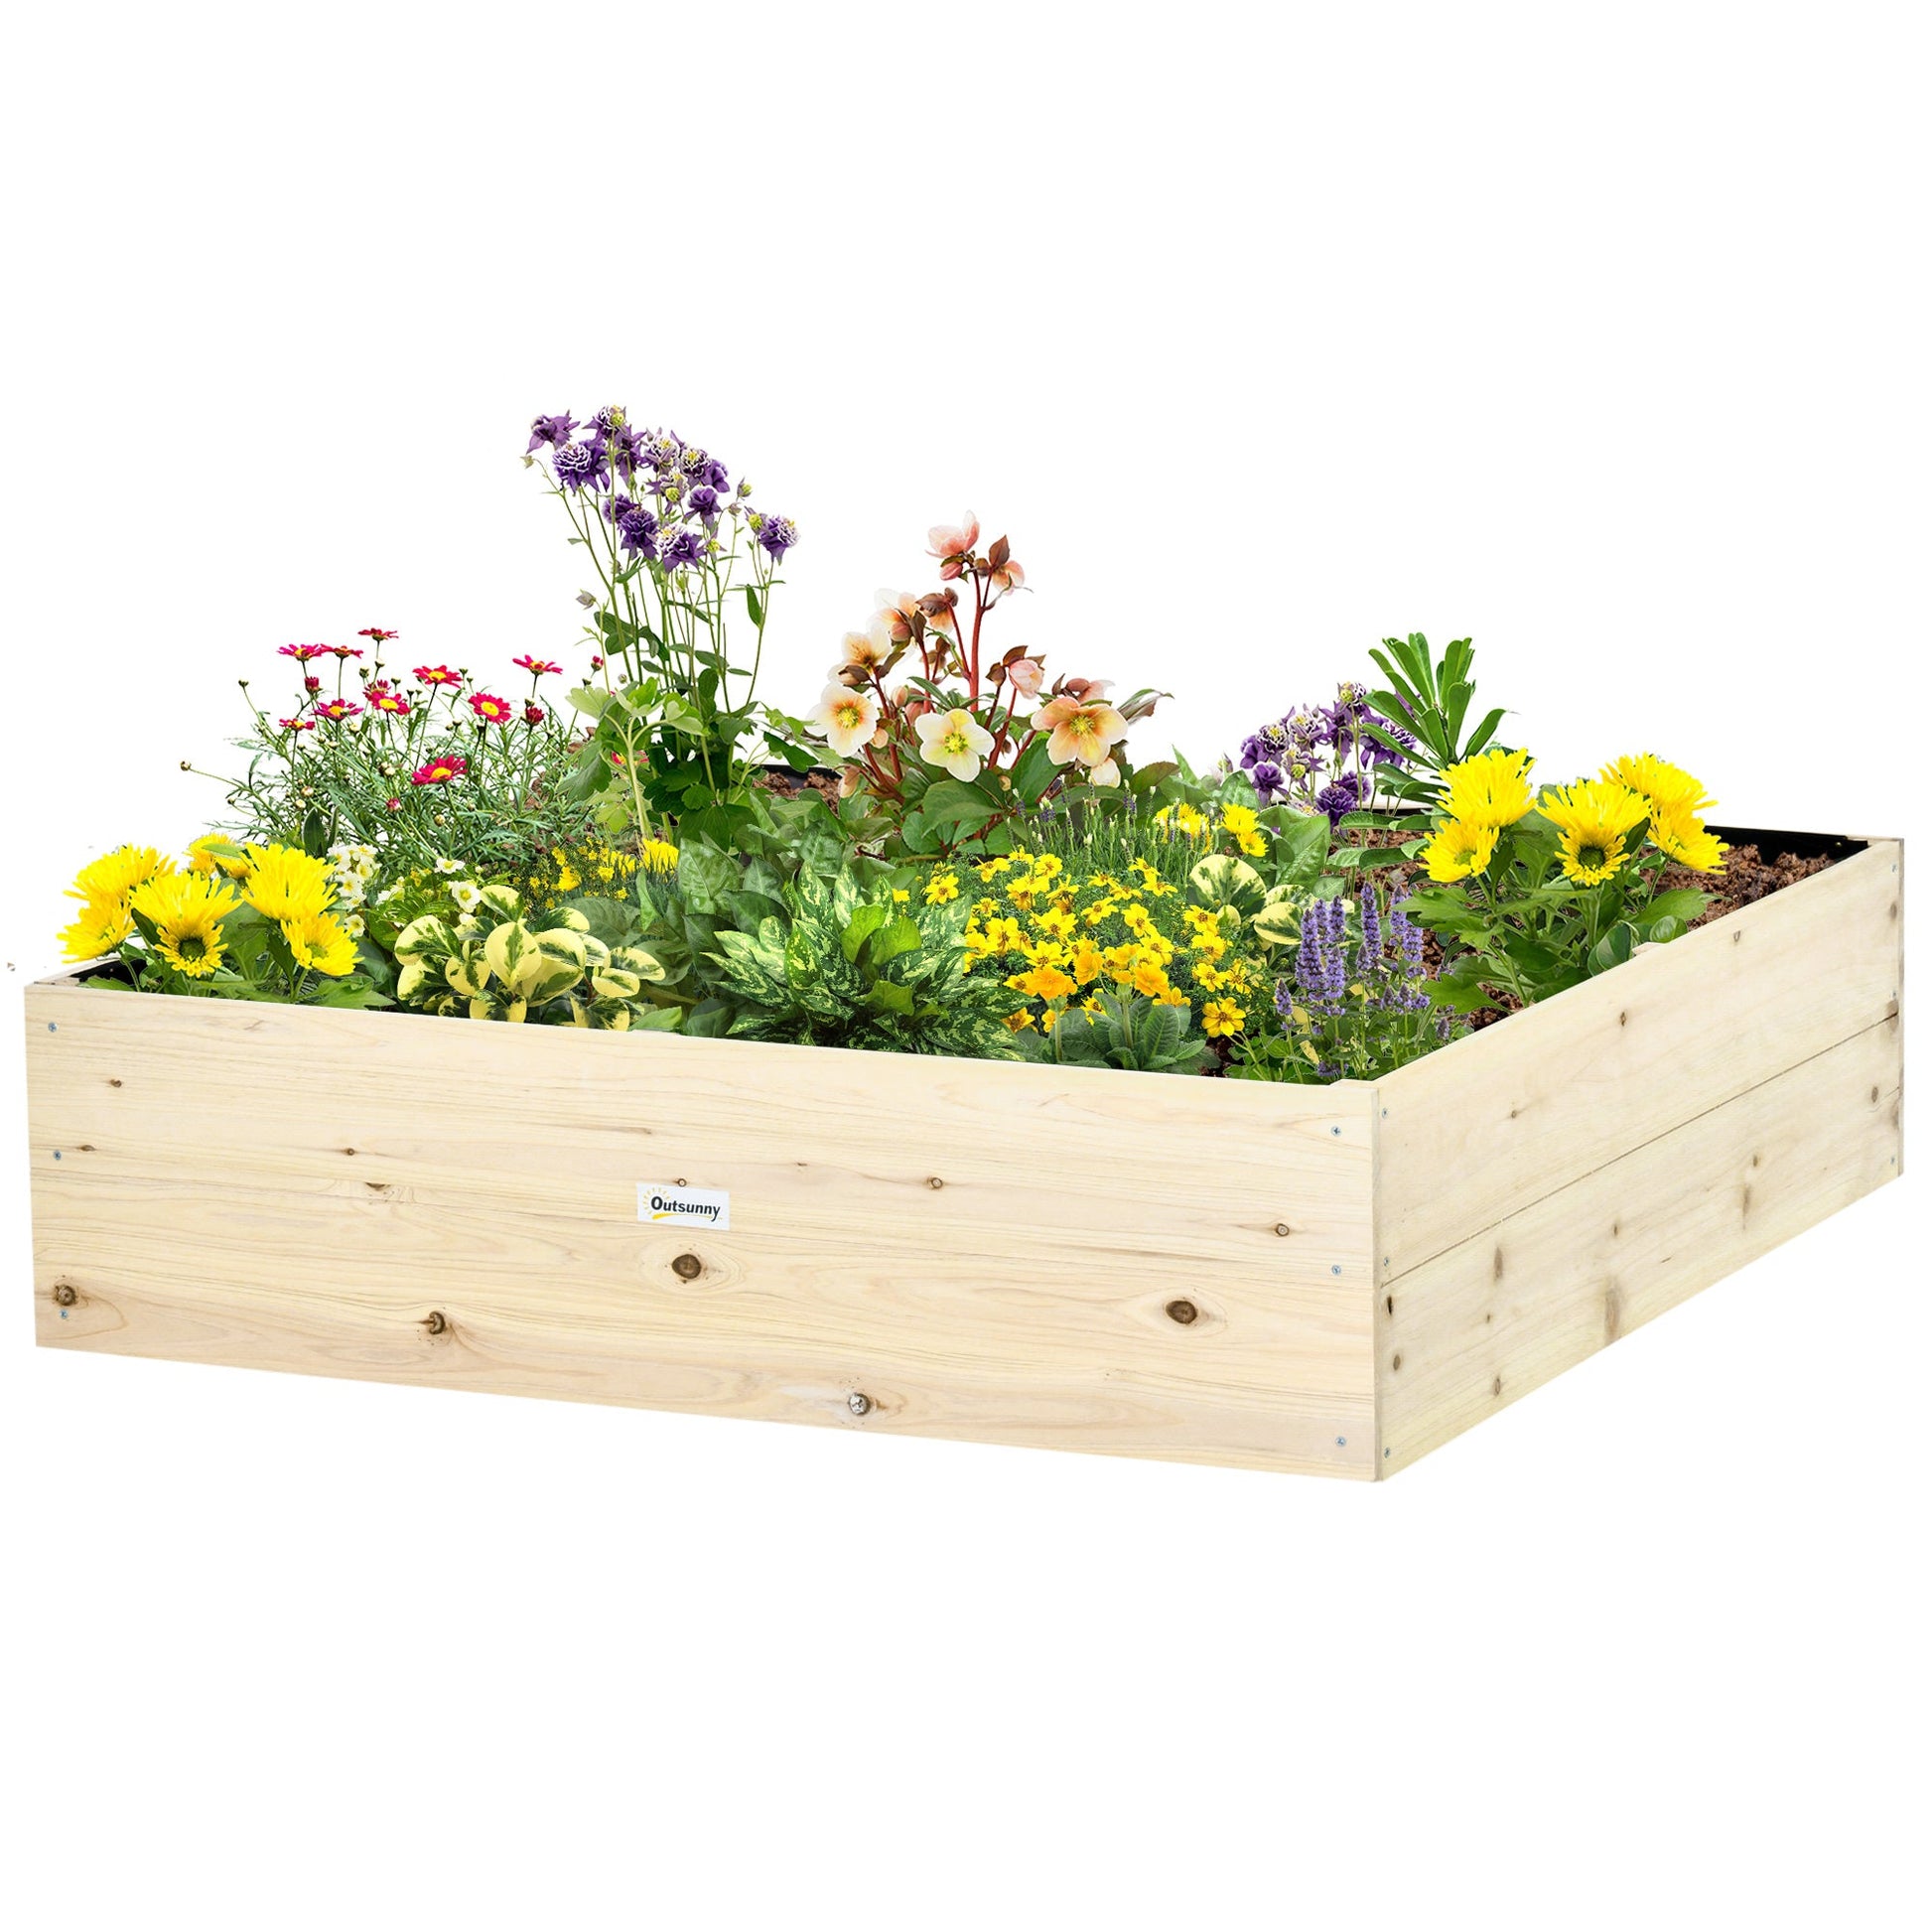 46'' x 46'' Raised Garden Bed Elevated Wooden Planter Box Outdoor for Backyard, Patio to Grow Vegetables, Herbs, and Flowers - Gallery Canada